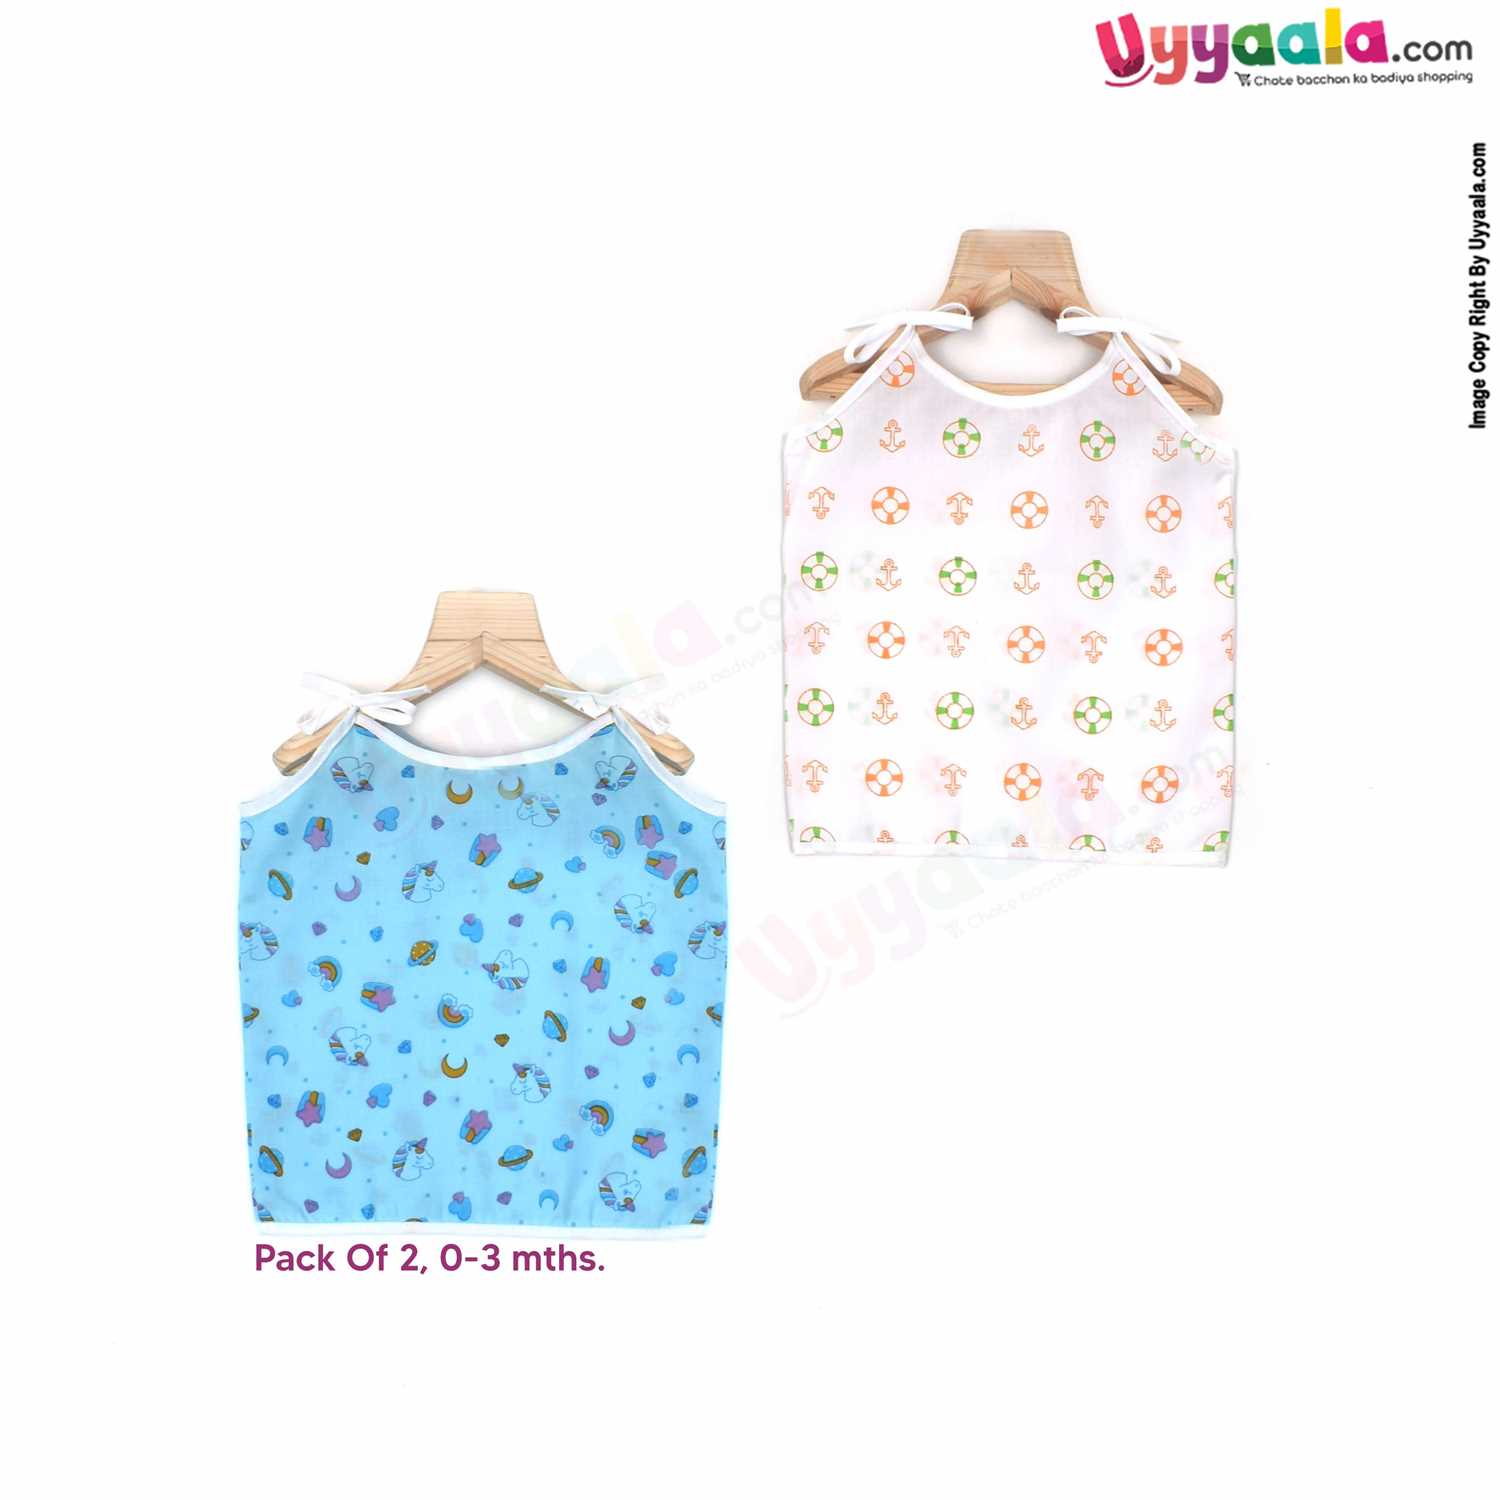 SNUG UP Sleeveless Baby Jabla Set, Top Opening Tie knot Lace Model, Premium Quality Cotton Baby Wear, Unicorn Horse & Anchor Print, (0-3M), 2Pack - Blue & White